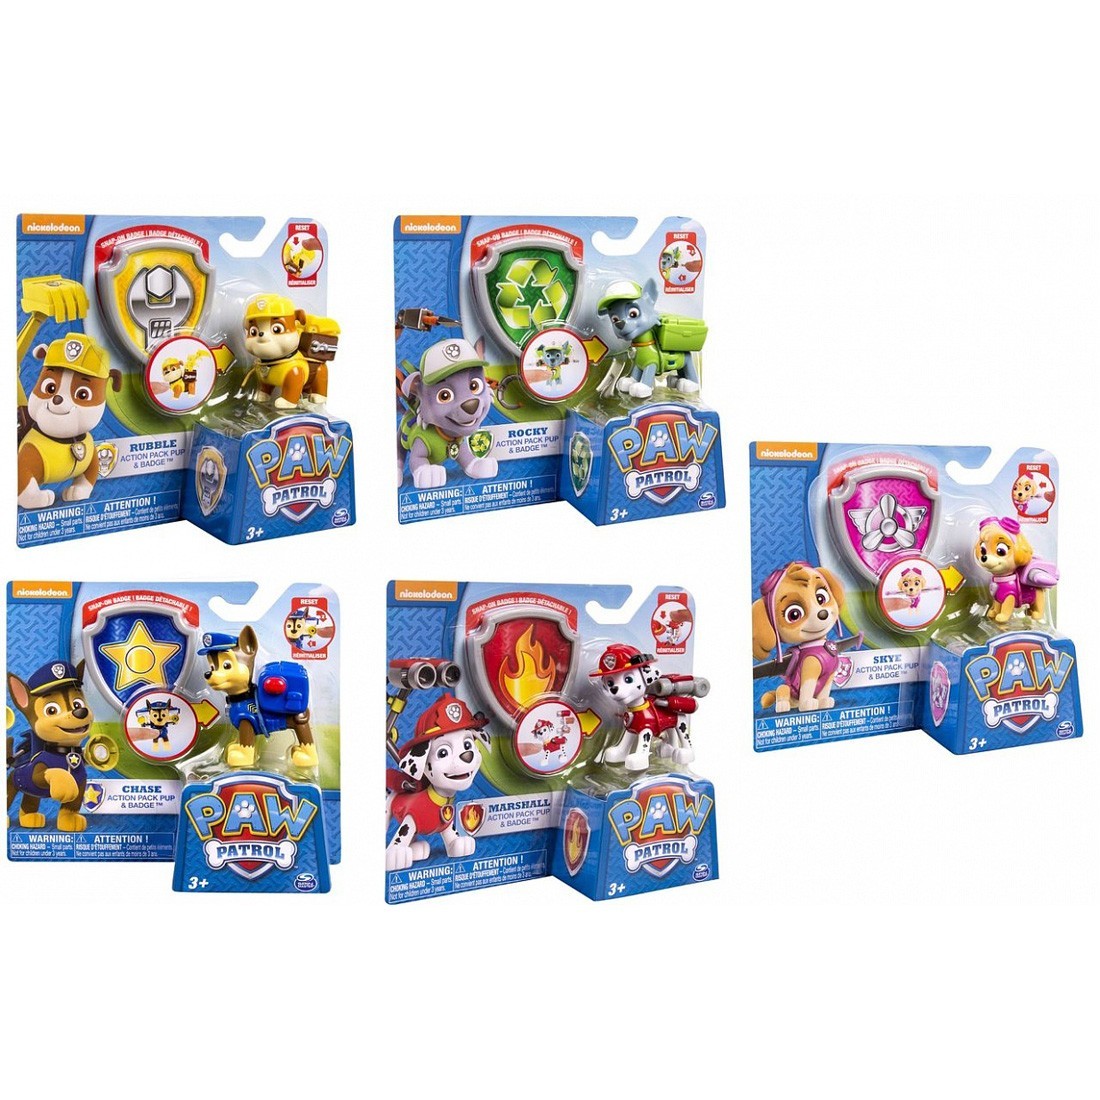 Shop Paw Patrol Action Pack Pup and Badge - Master, delivered to your home | The Outfit